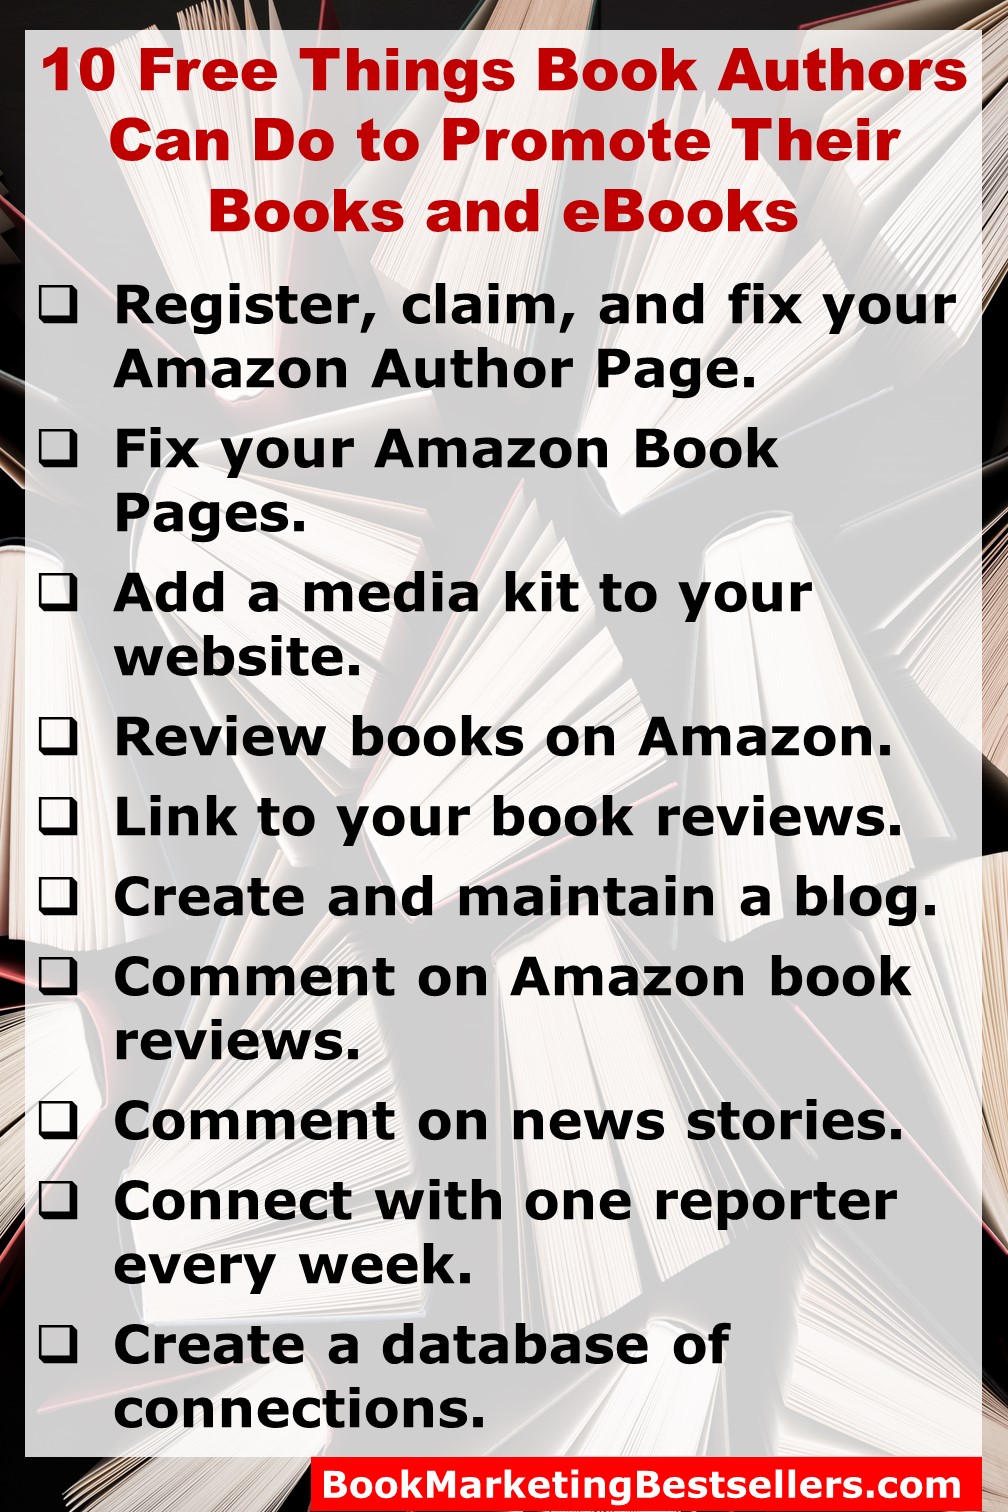 10 Free Things You Can Do to Promote Your Books and eBooks